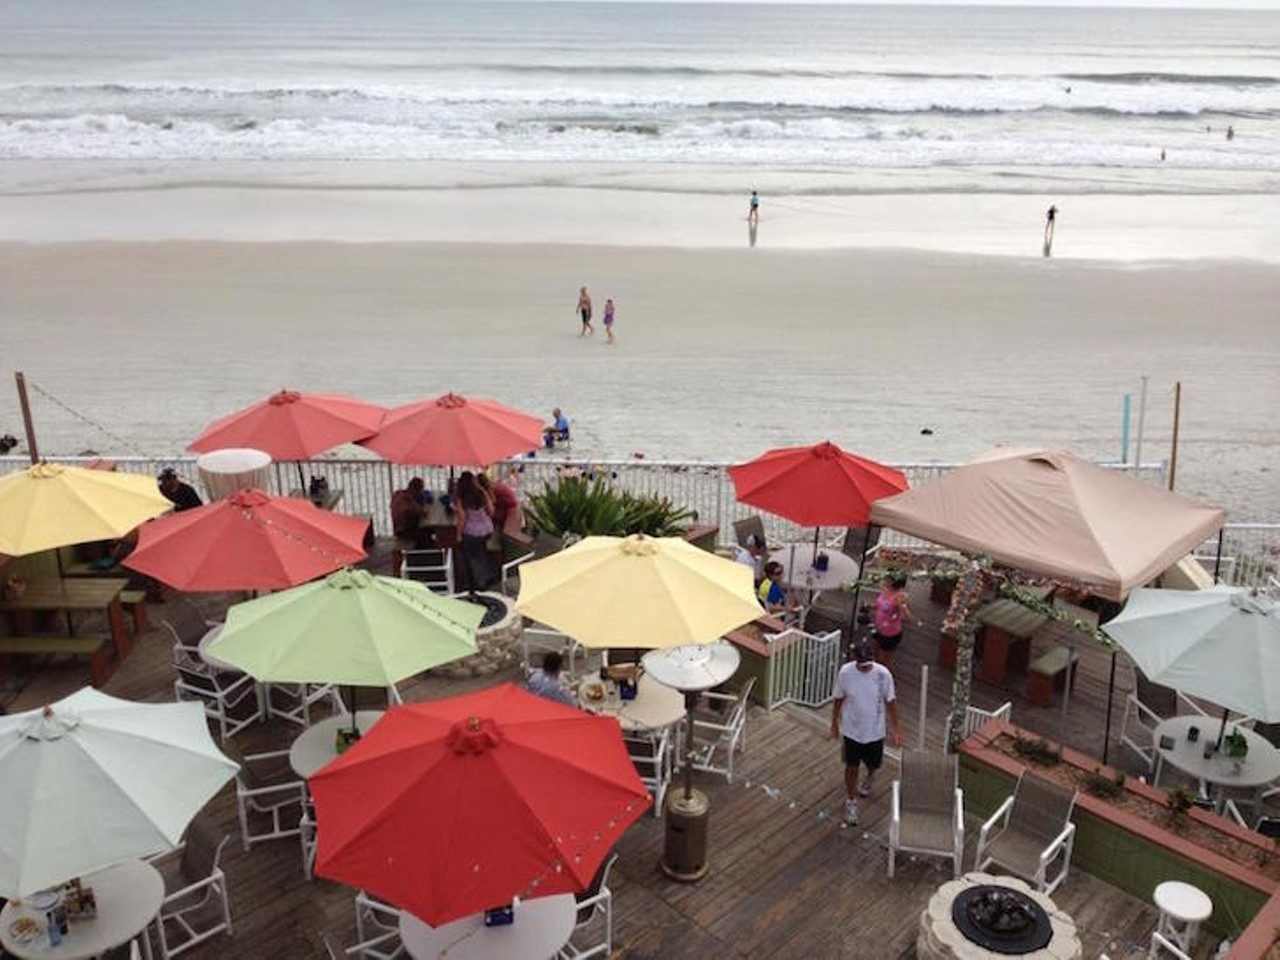 The Beach Bucket Oceanside Bar & Grill
867 S Atlantic Ave., Ormond Beach, 386-308-1134 
Diners at the Beach Bucket can enjoy the sights and sounds of Daytona and Ormond Beaches with prime oceanside seating. There is street parking and a designated parking lot for restaurant goers. Connected to the South side of Oceans East Resort, the Beach Bucket hosts live music on Wednesdays and the weekends, providing entertainment for the whole family. 
Photo via Beach Bucket/Facebook